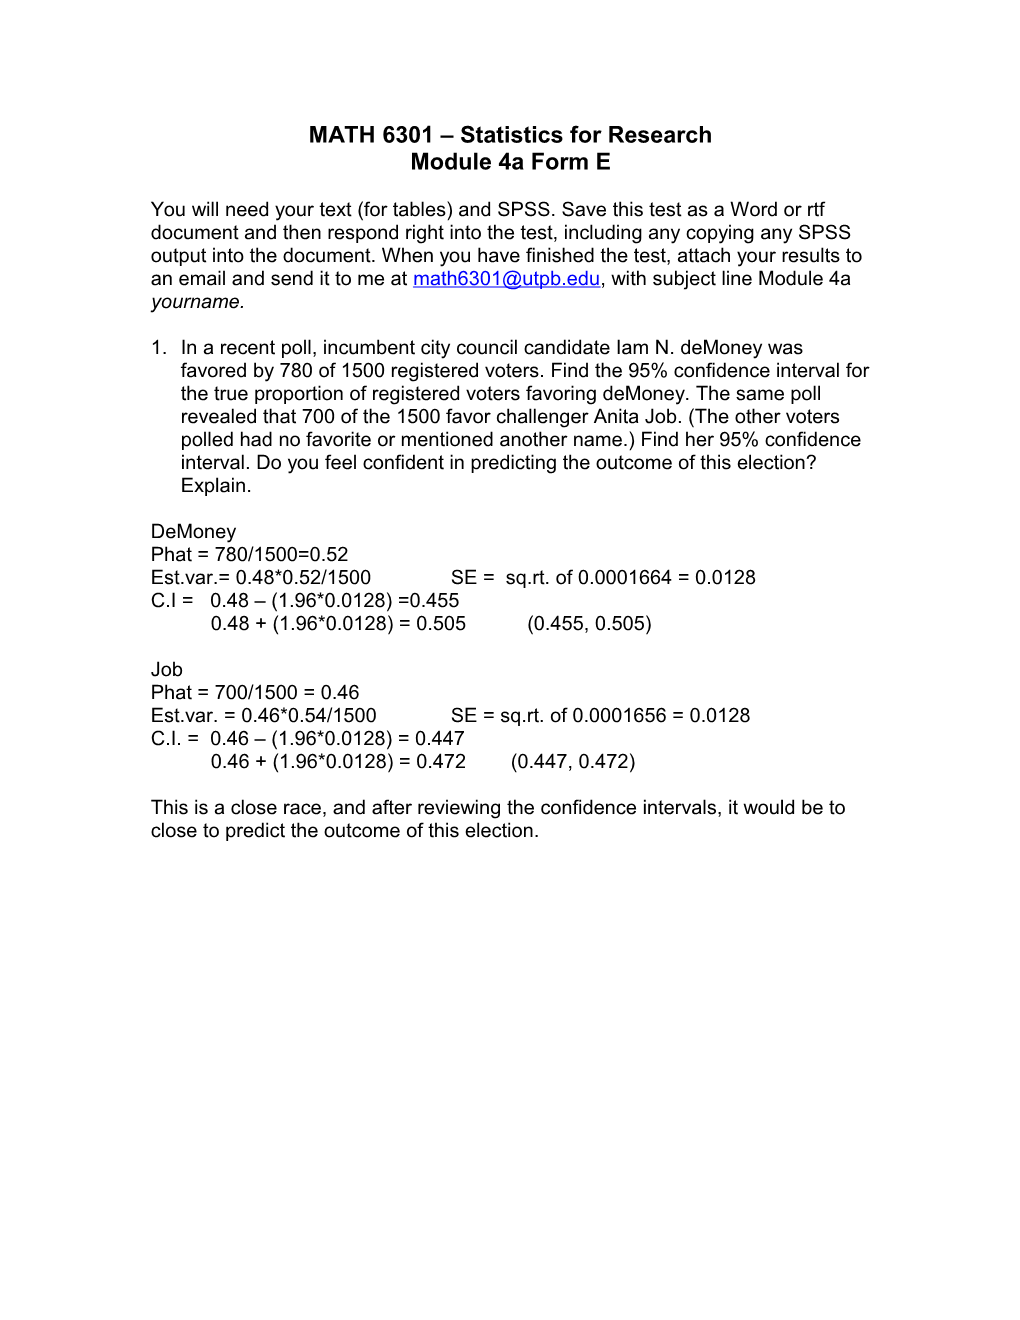 MATH 6301 – Statistics For Research